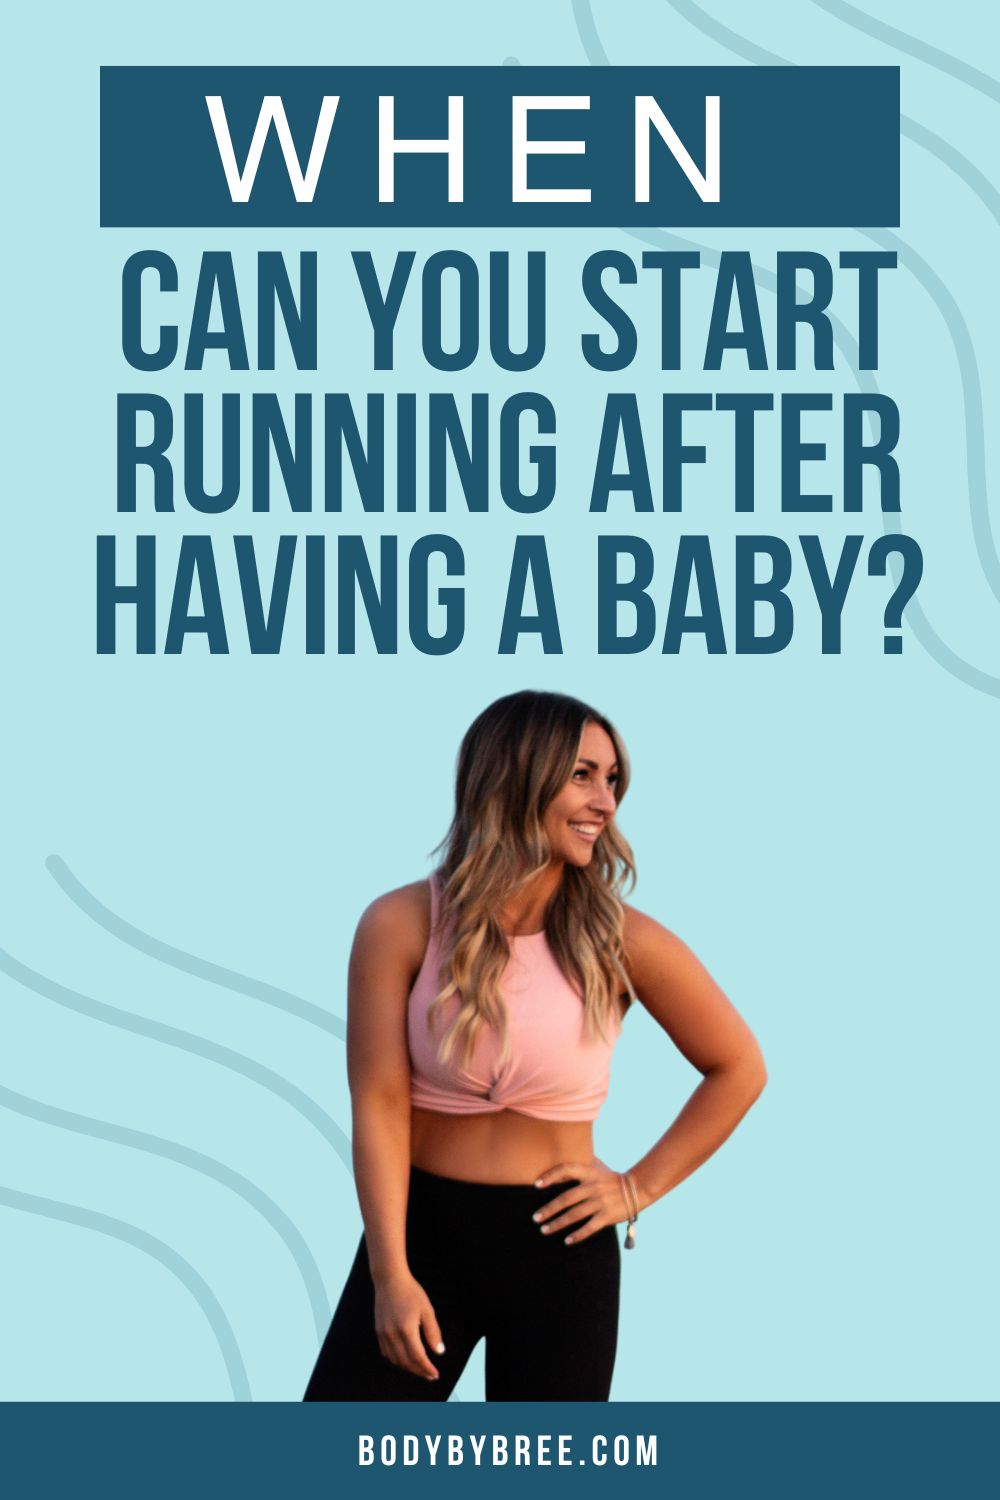 WHEN CAN YOU START RUNNING AFTER HAVING A BABY